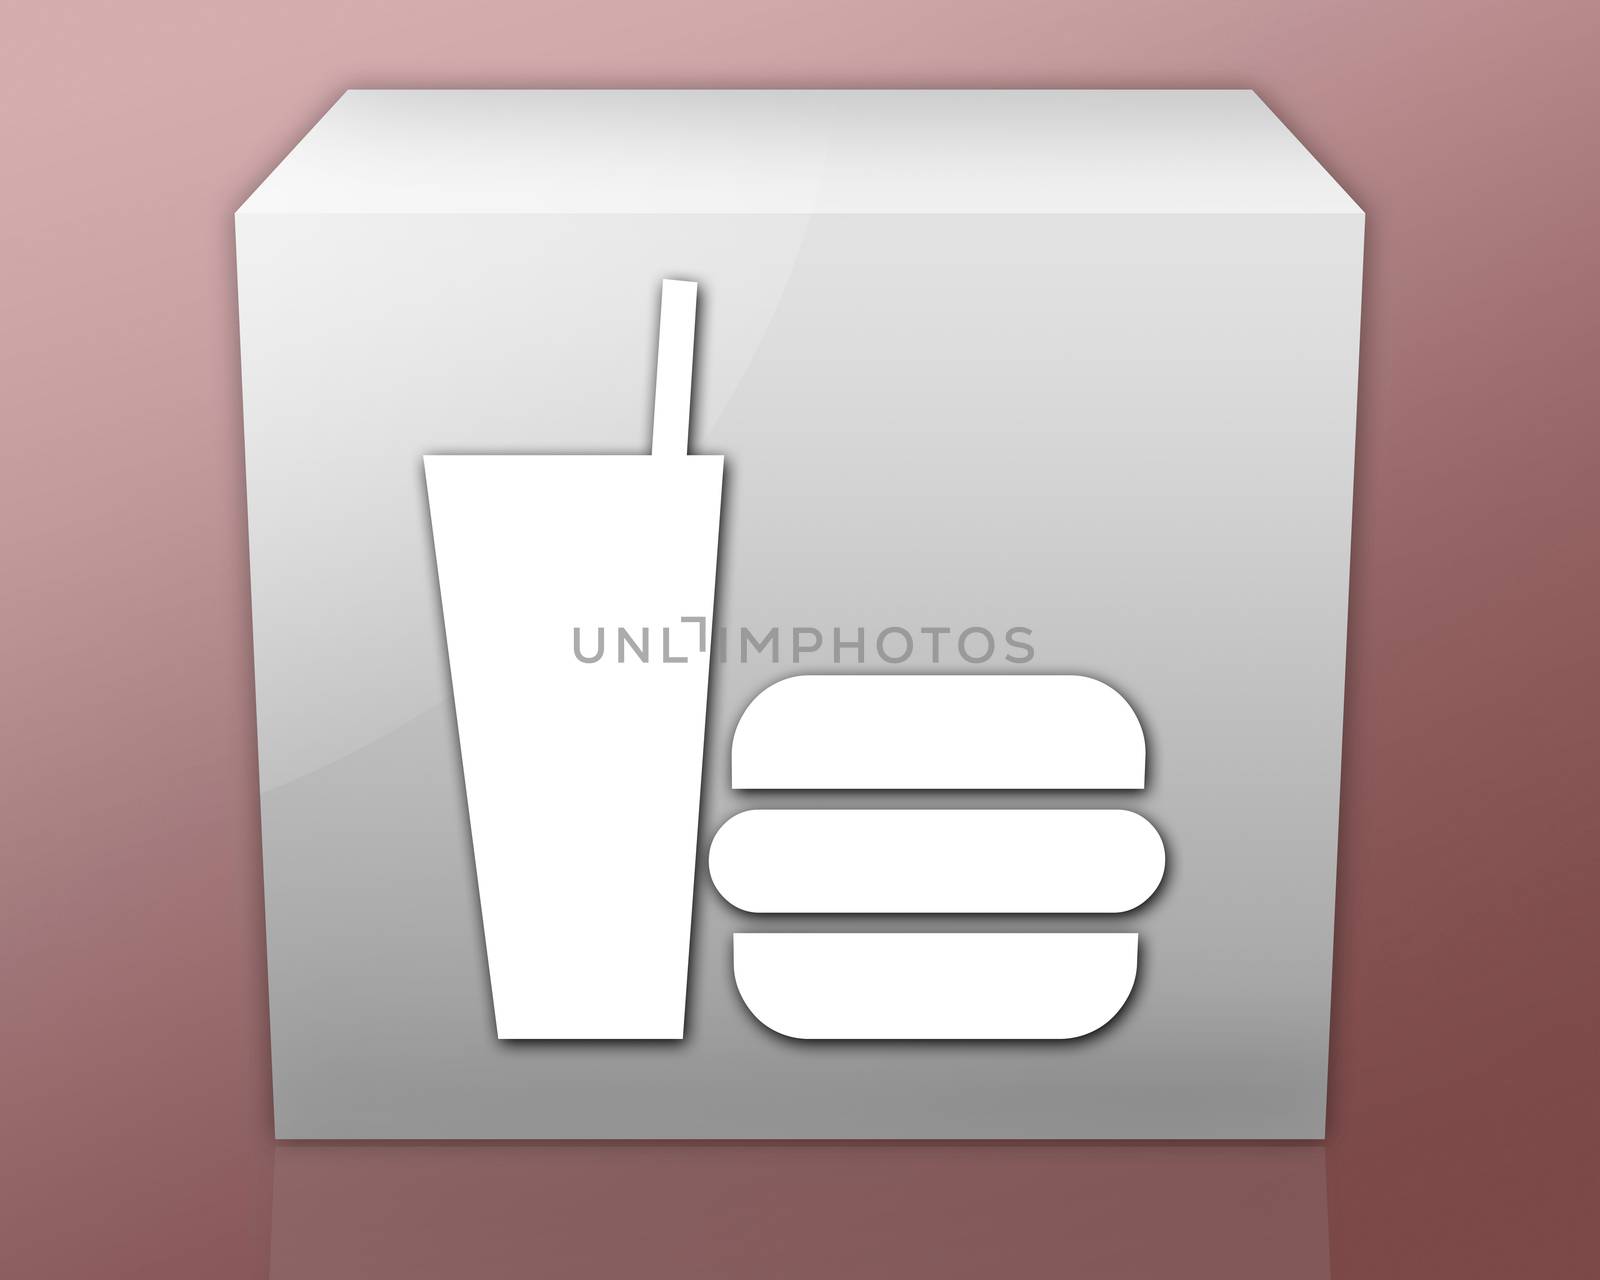 Icon, Button, Pictogram Fast Food by mindscanner